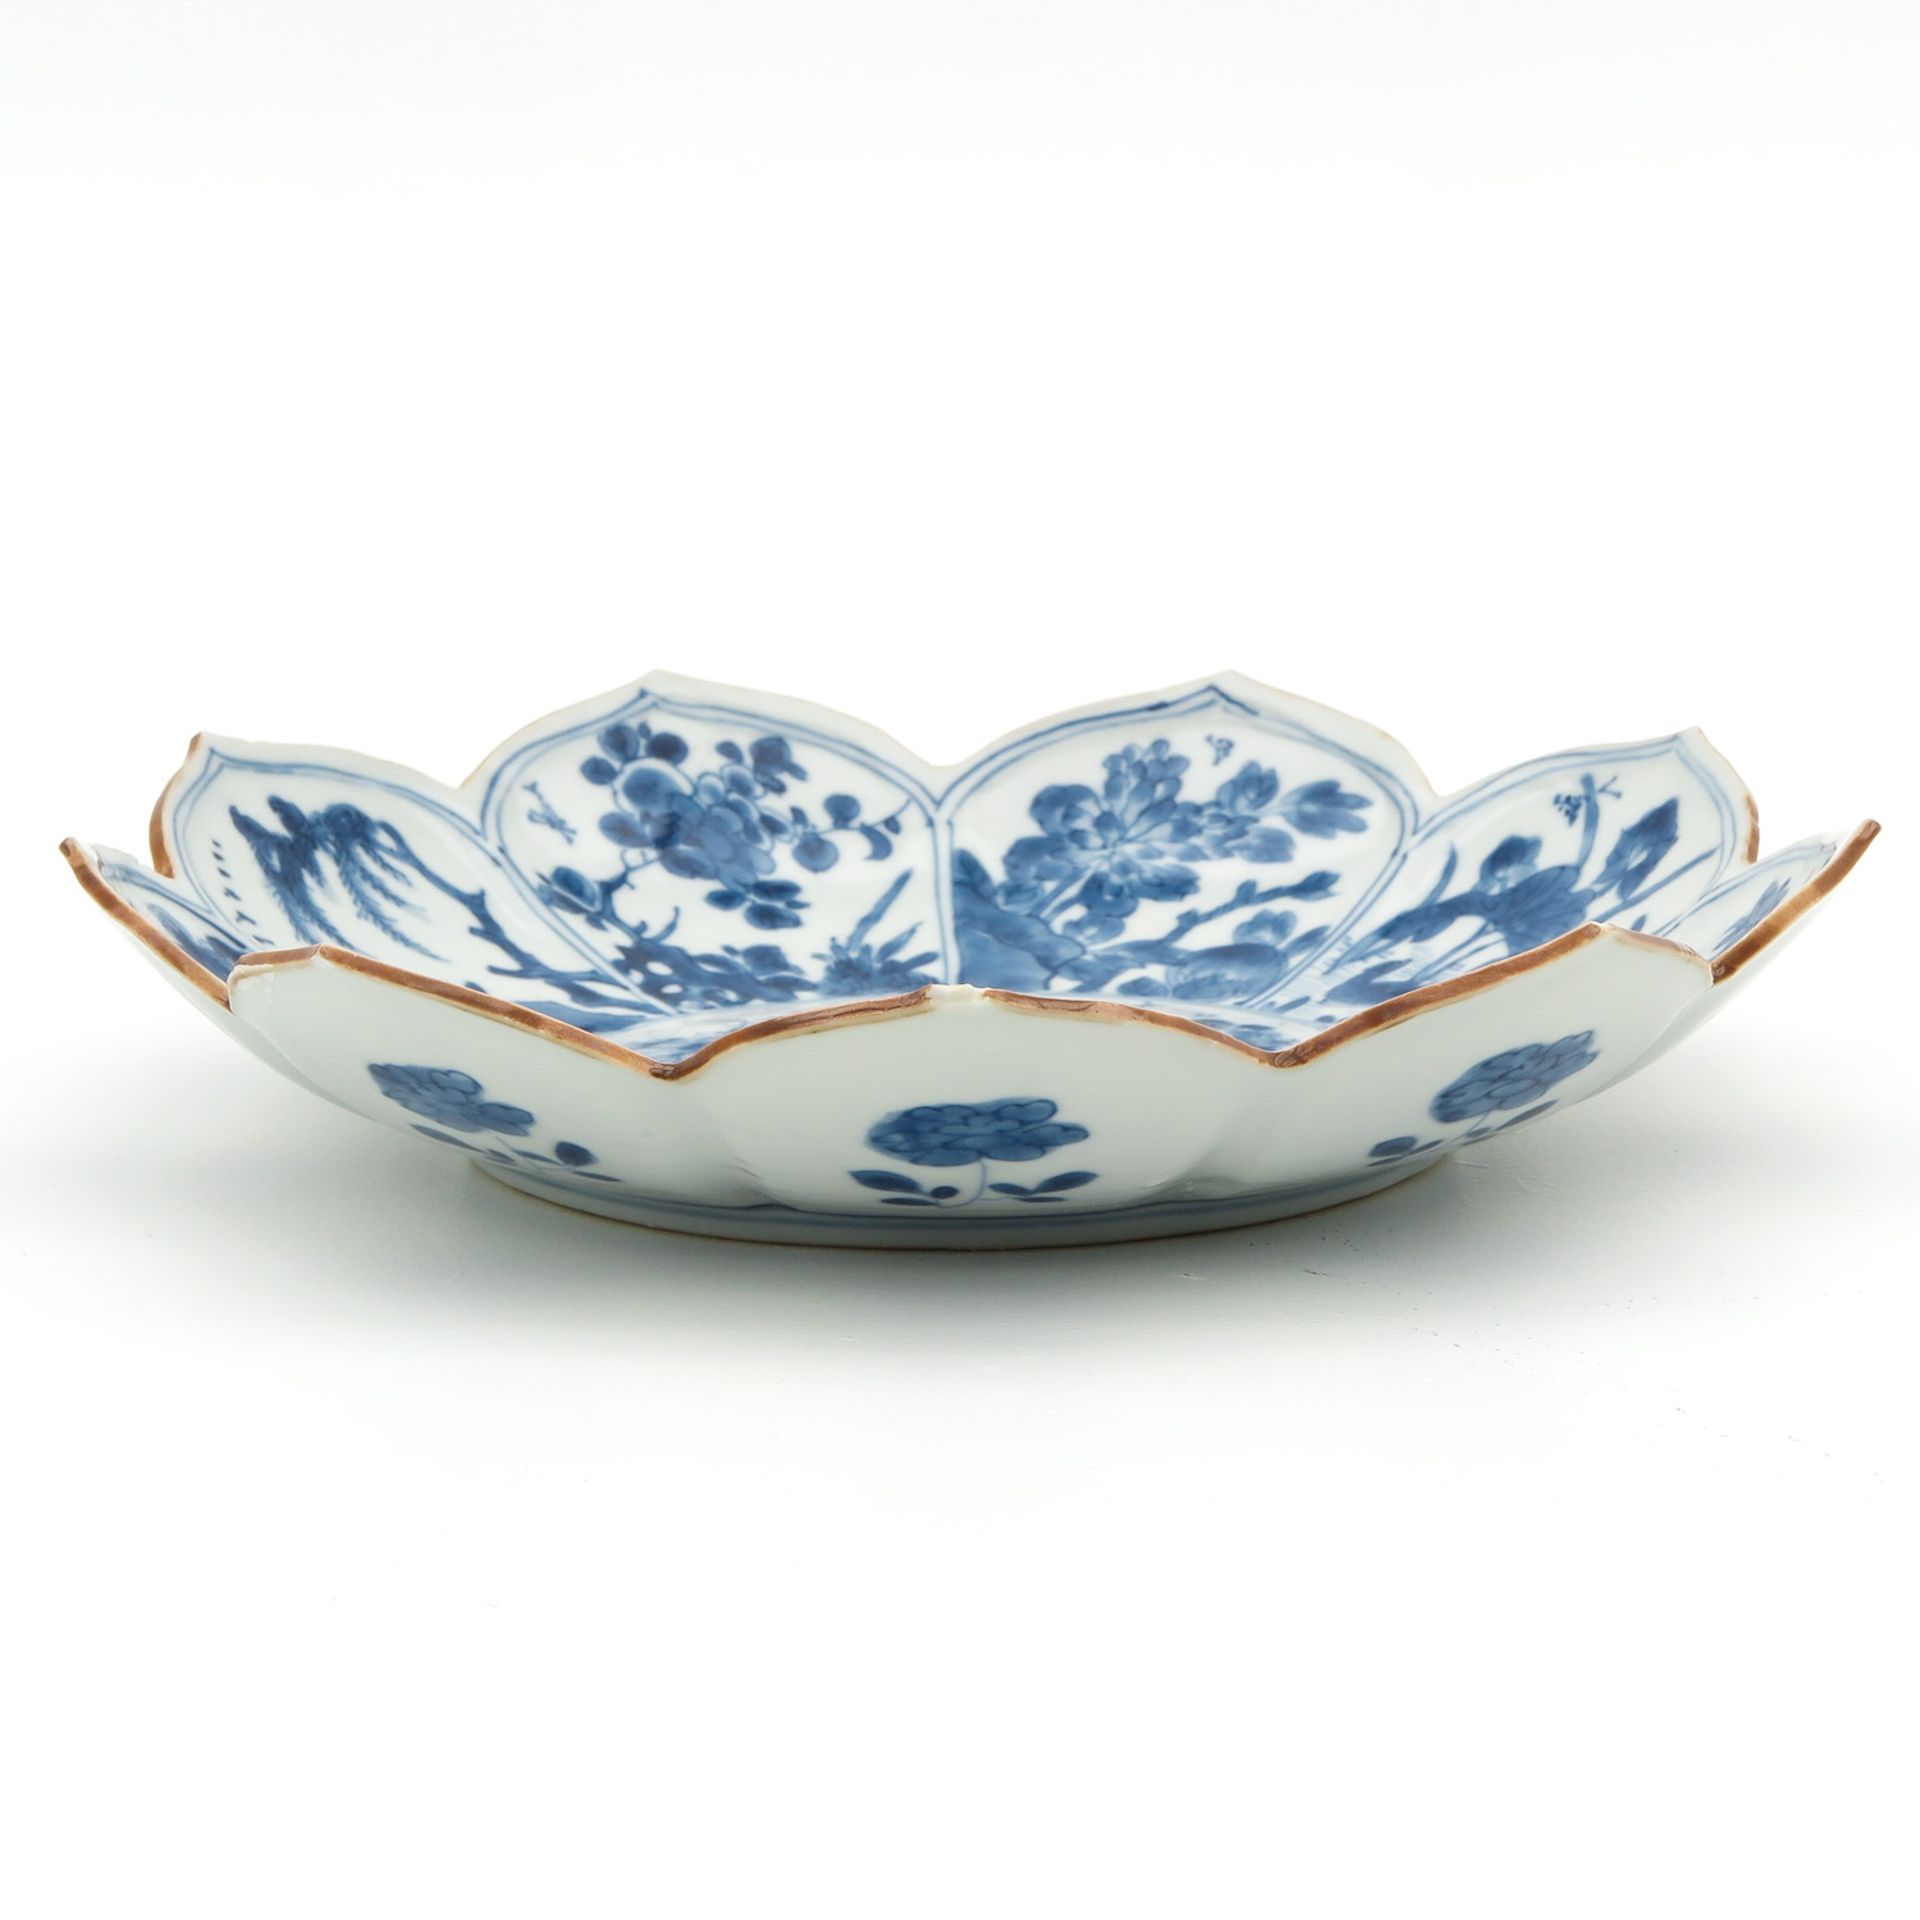 A Blue and White Dish - Image 4 of 9